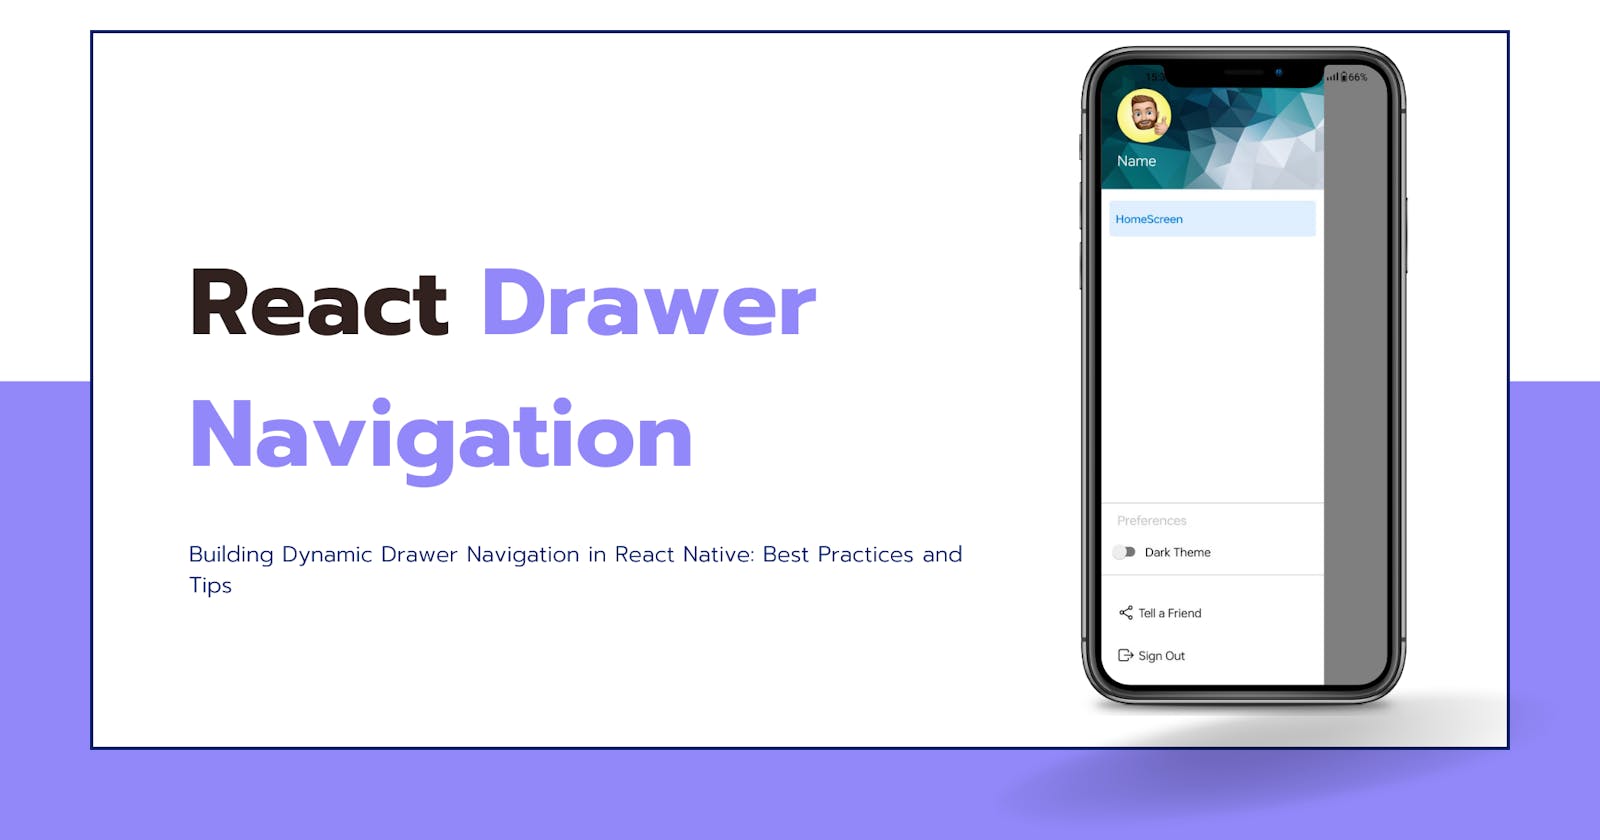 Building Custom Dynamic Drawer Navigation in React Native: Best Practices and Tips